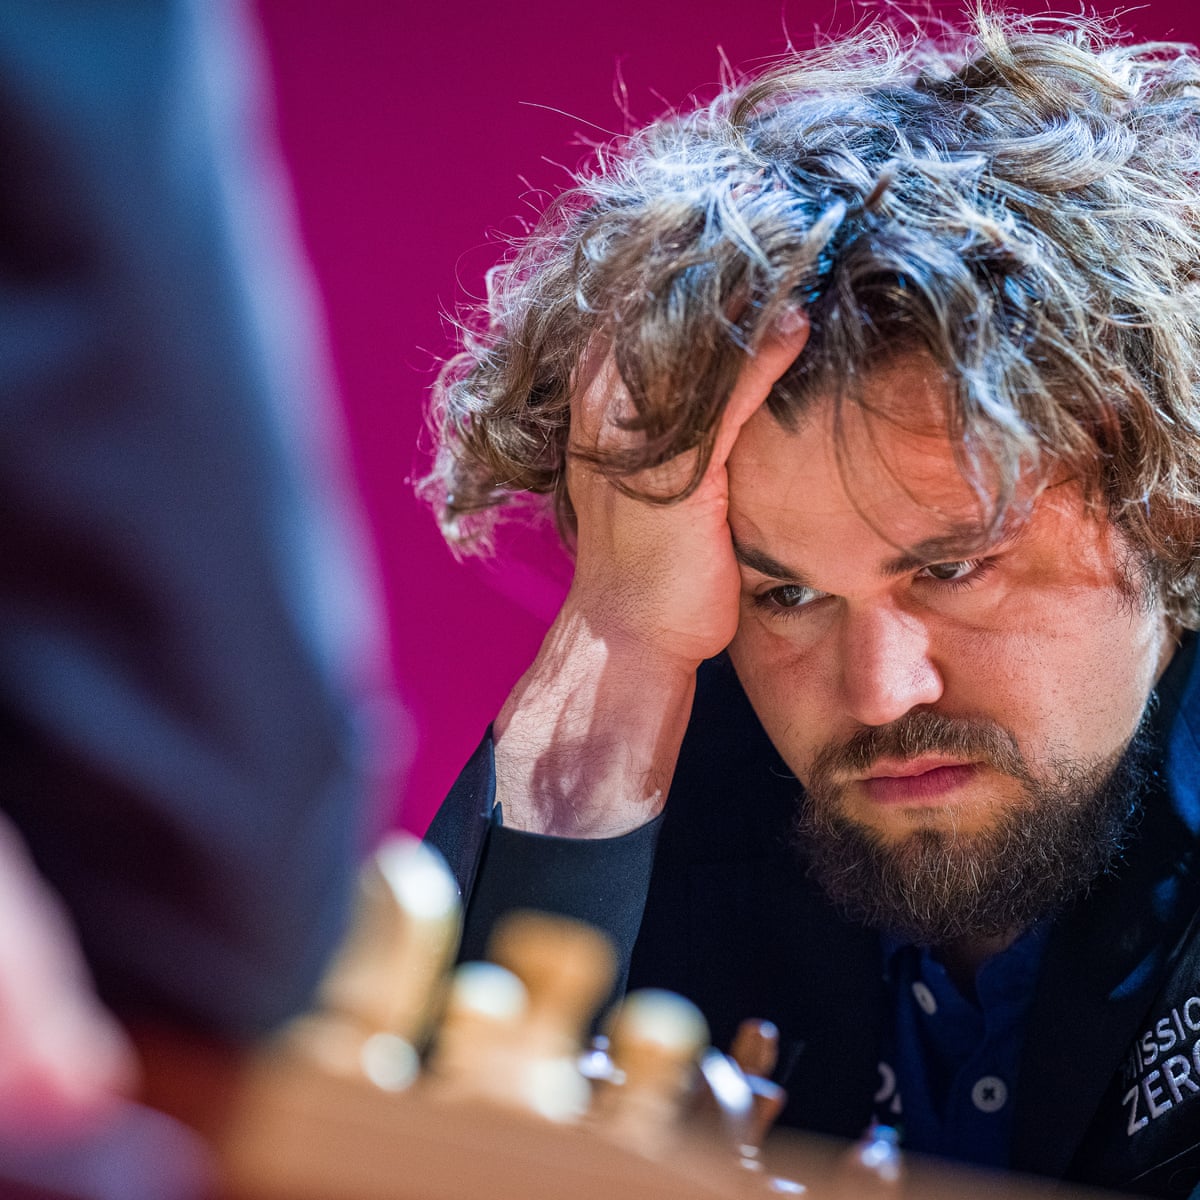 World Cup: Carlsen remains in the race, but Wesley So is out